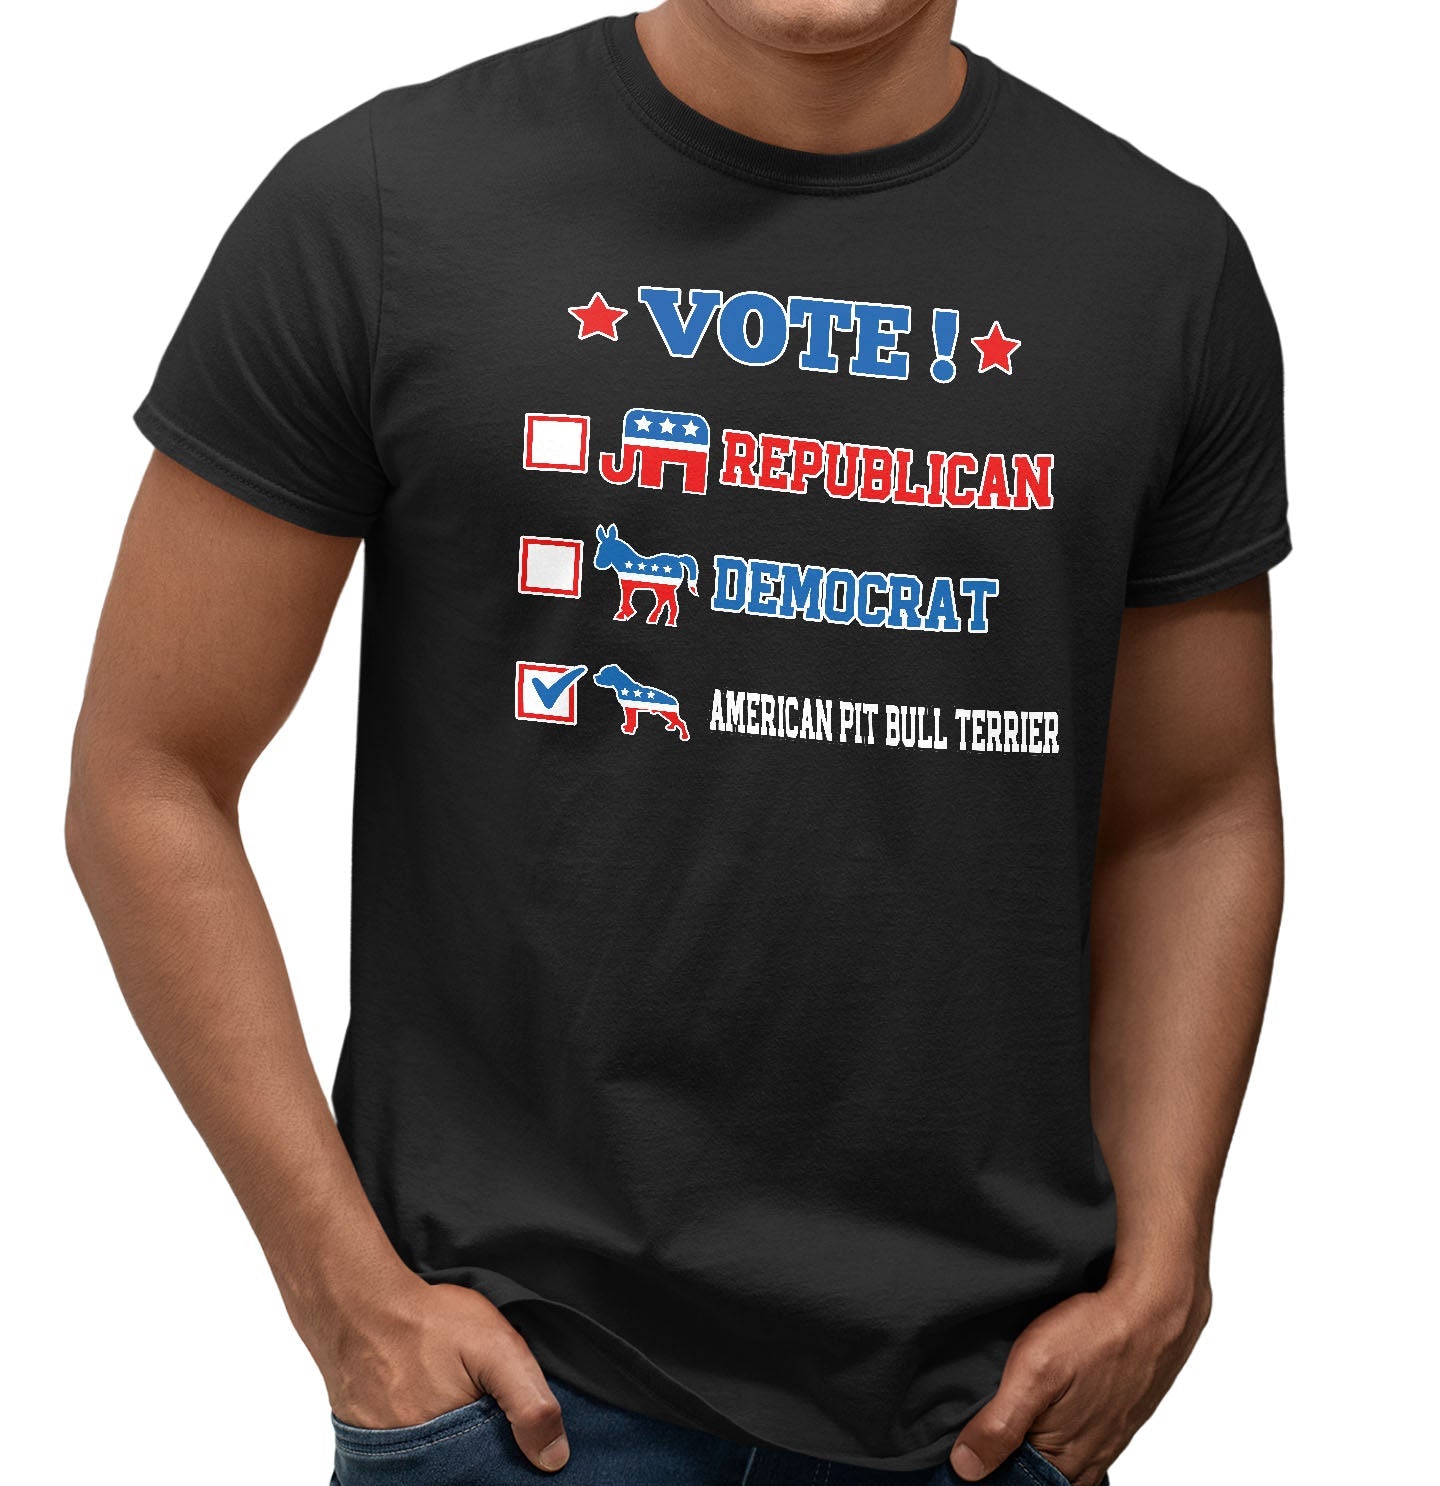 Vote for the American Pit Bull Terrier - Adult Unisex T-Shirt